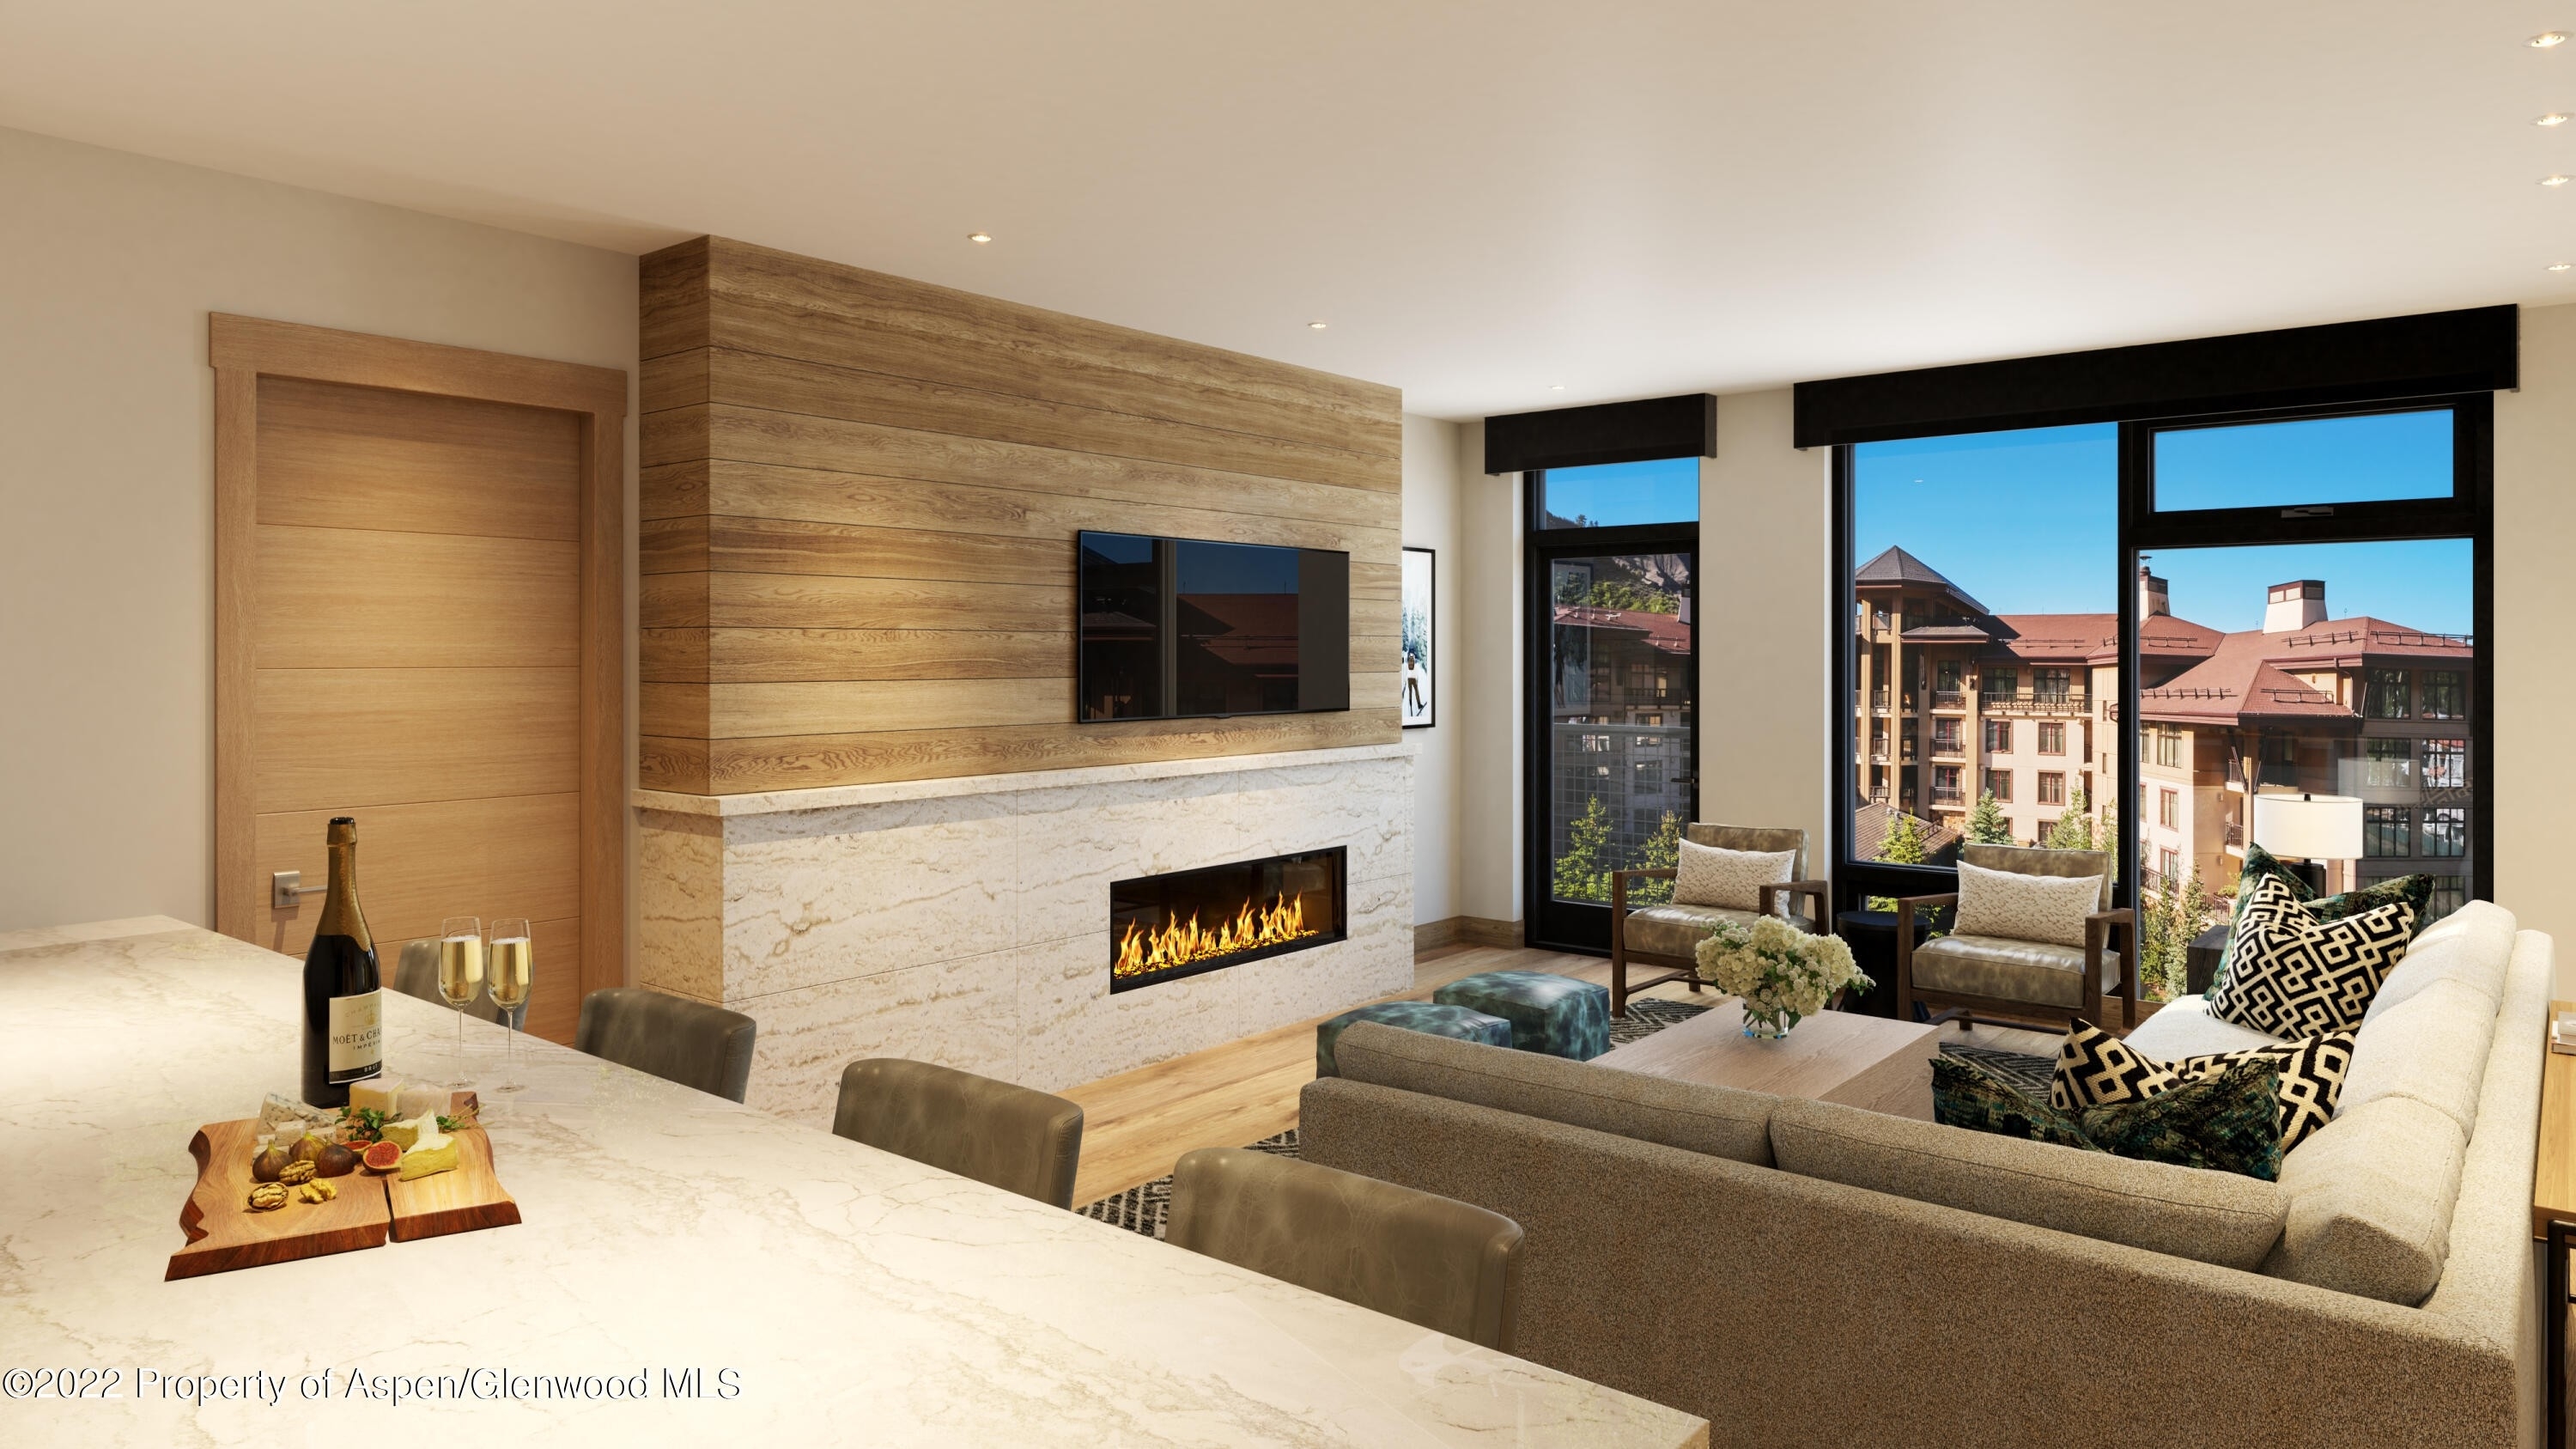 Property at 130 Wood Road, 361-363 Snowmass Village, CO 81615